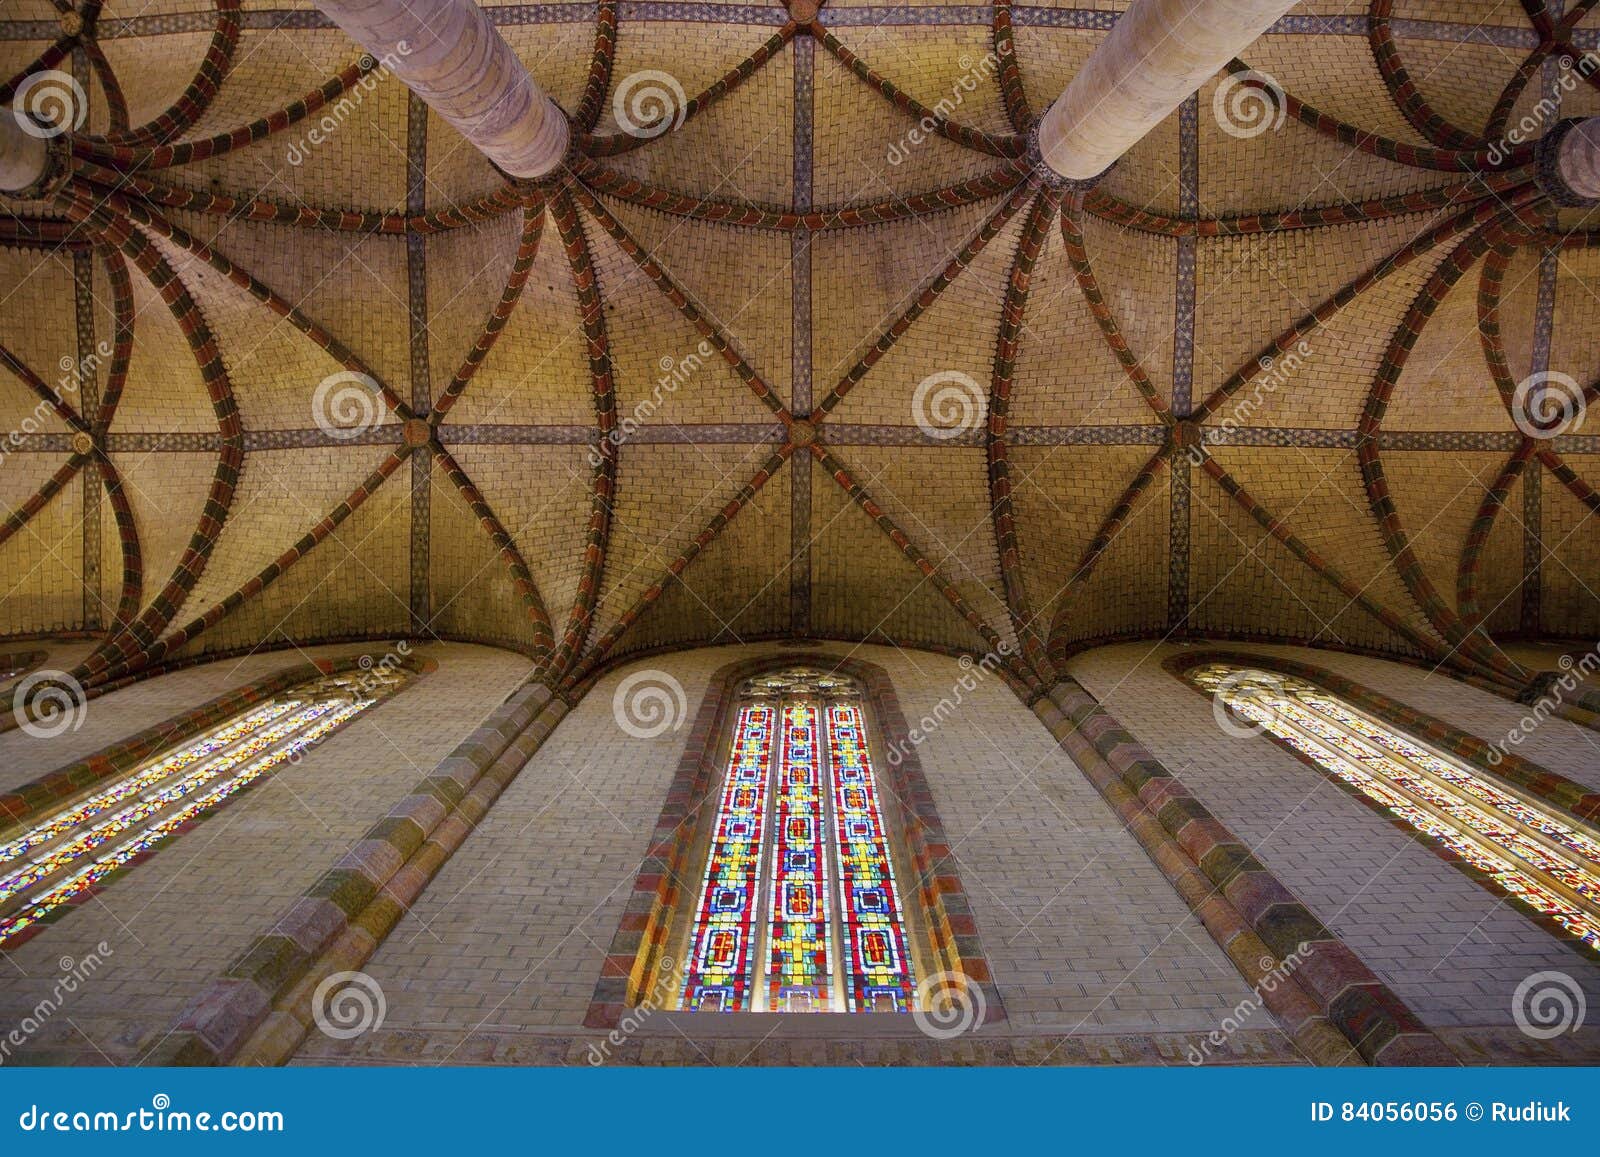 Medieval Ceiling in French Cathedral Stock Photo - Image of pattern